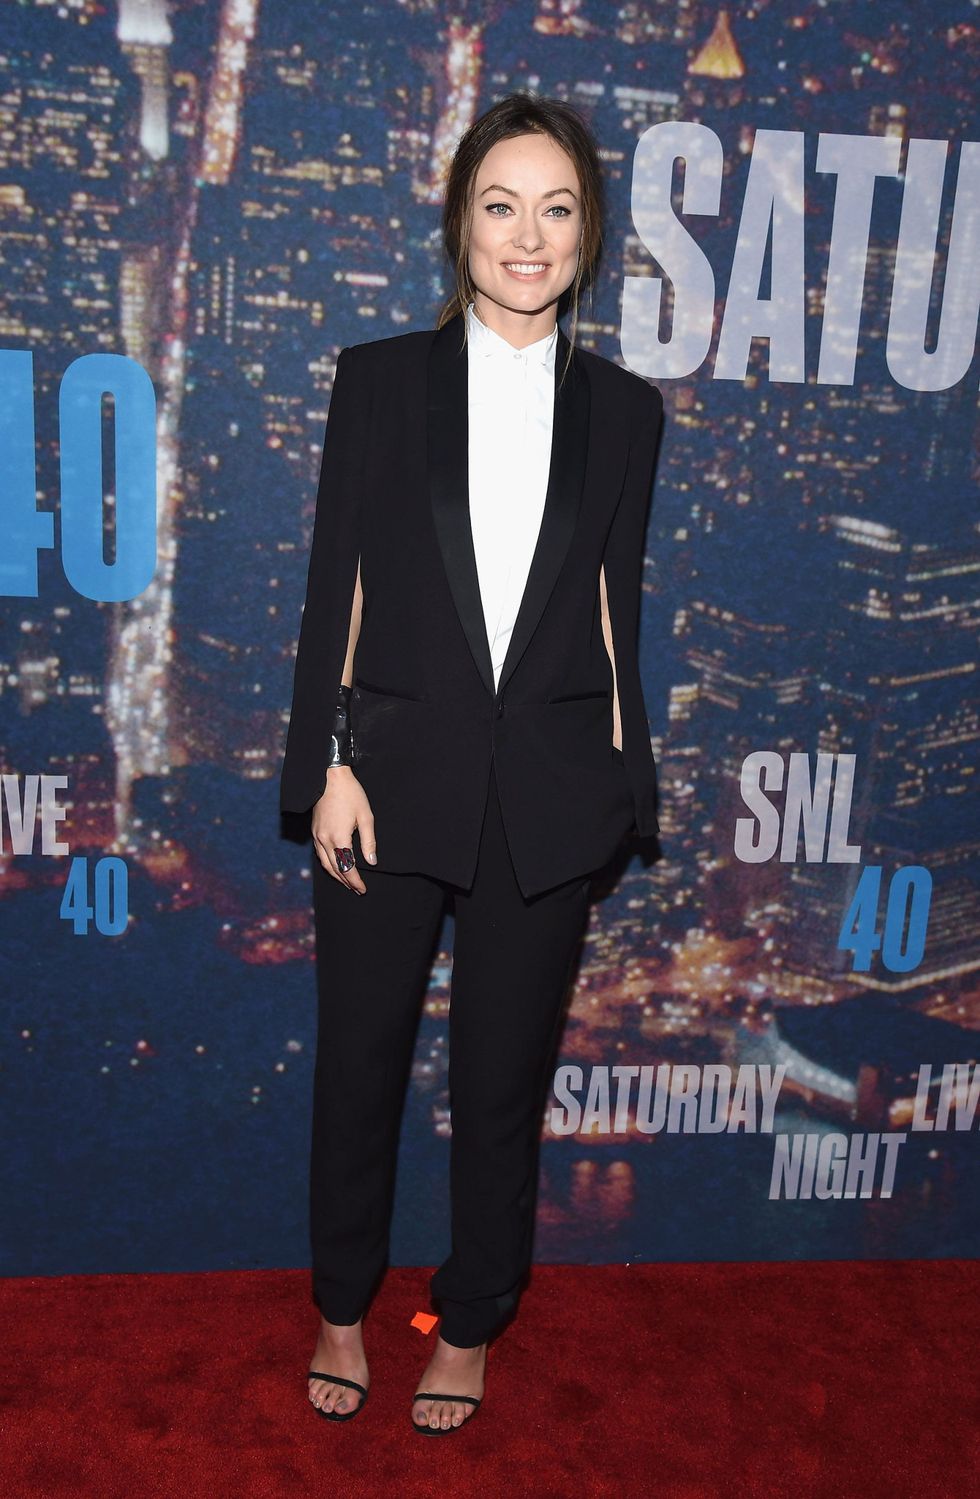 Olivia Wilde wears a suit to SNL 40